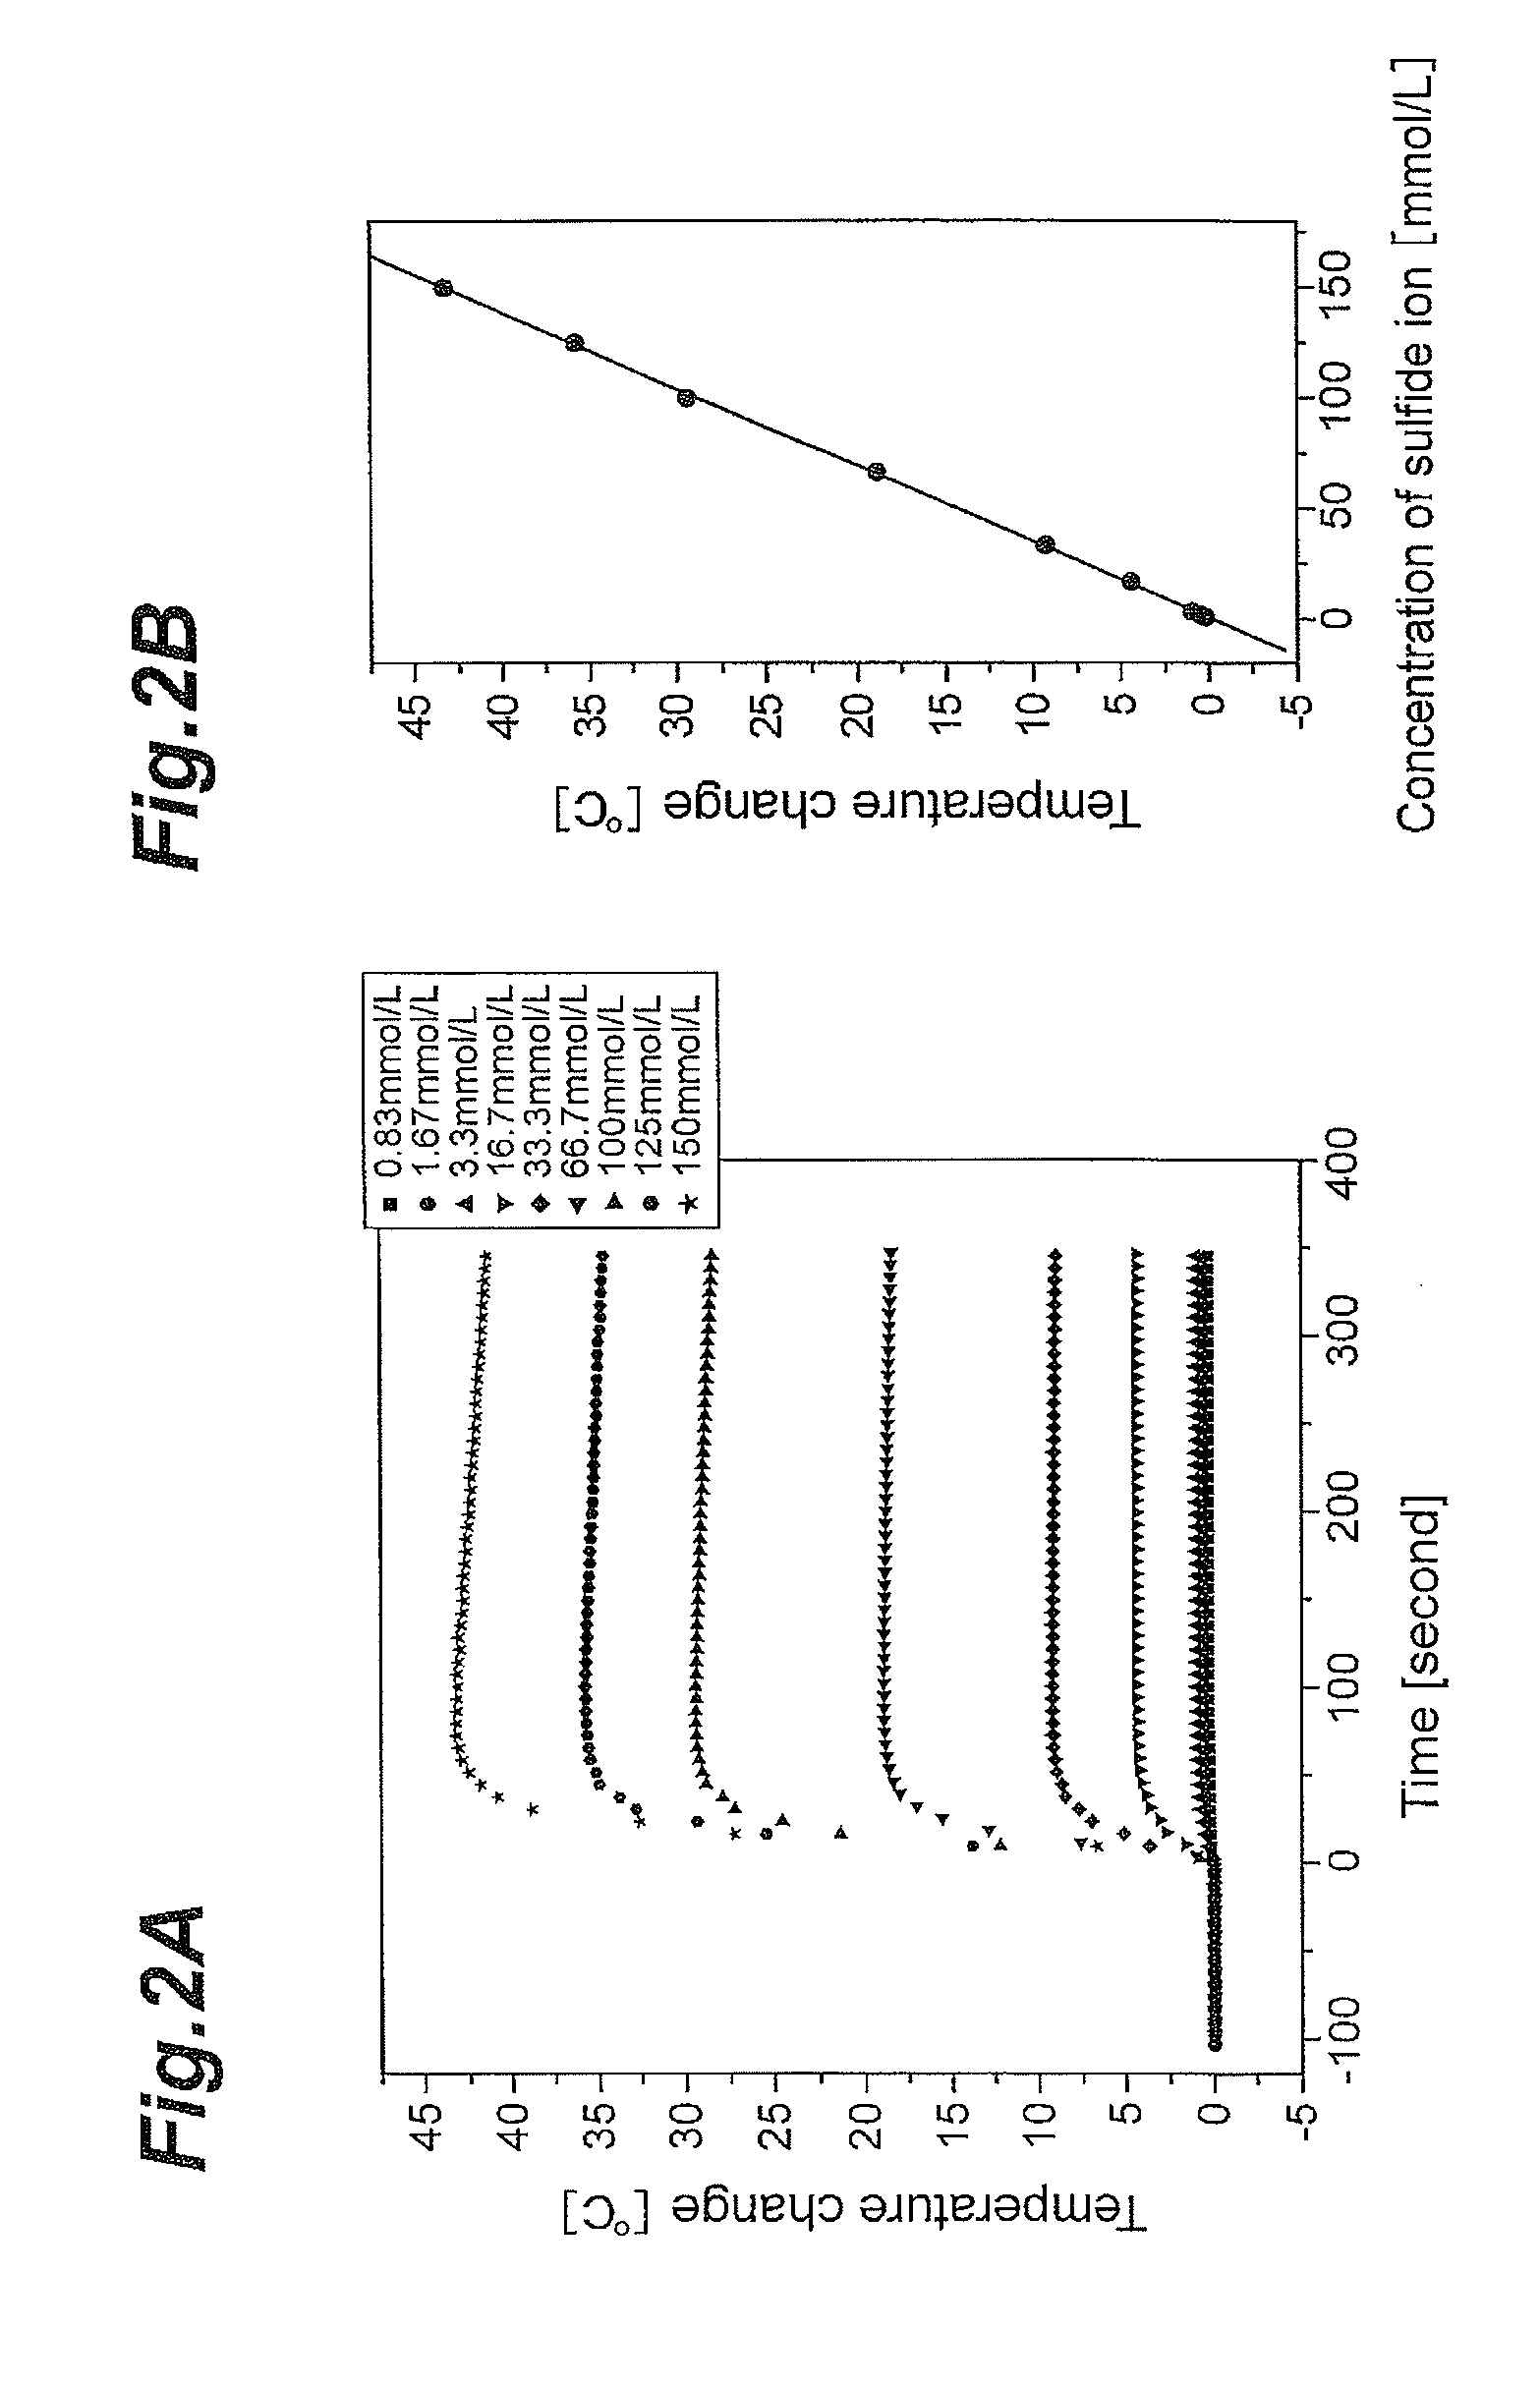 Concentration measuring apparatus for hydrogen sulfide in gas flow, and method for determining sulfide ion